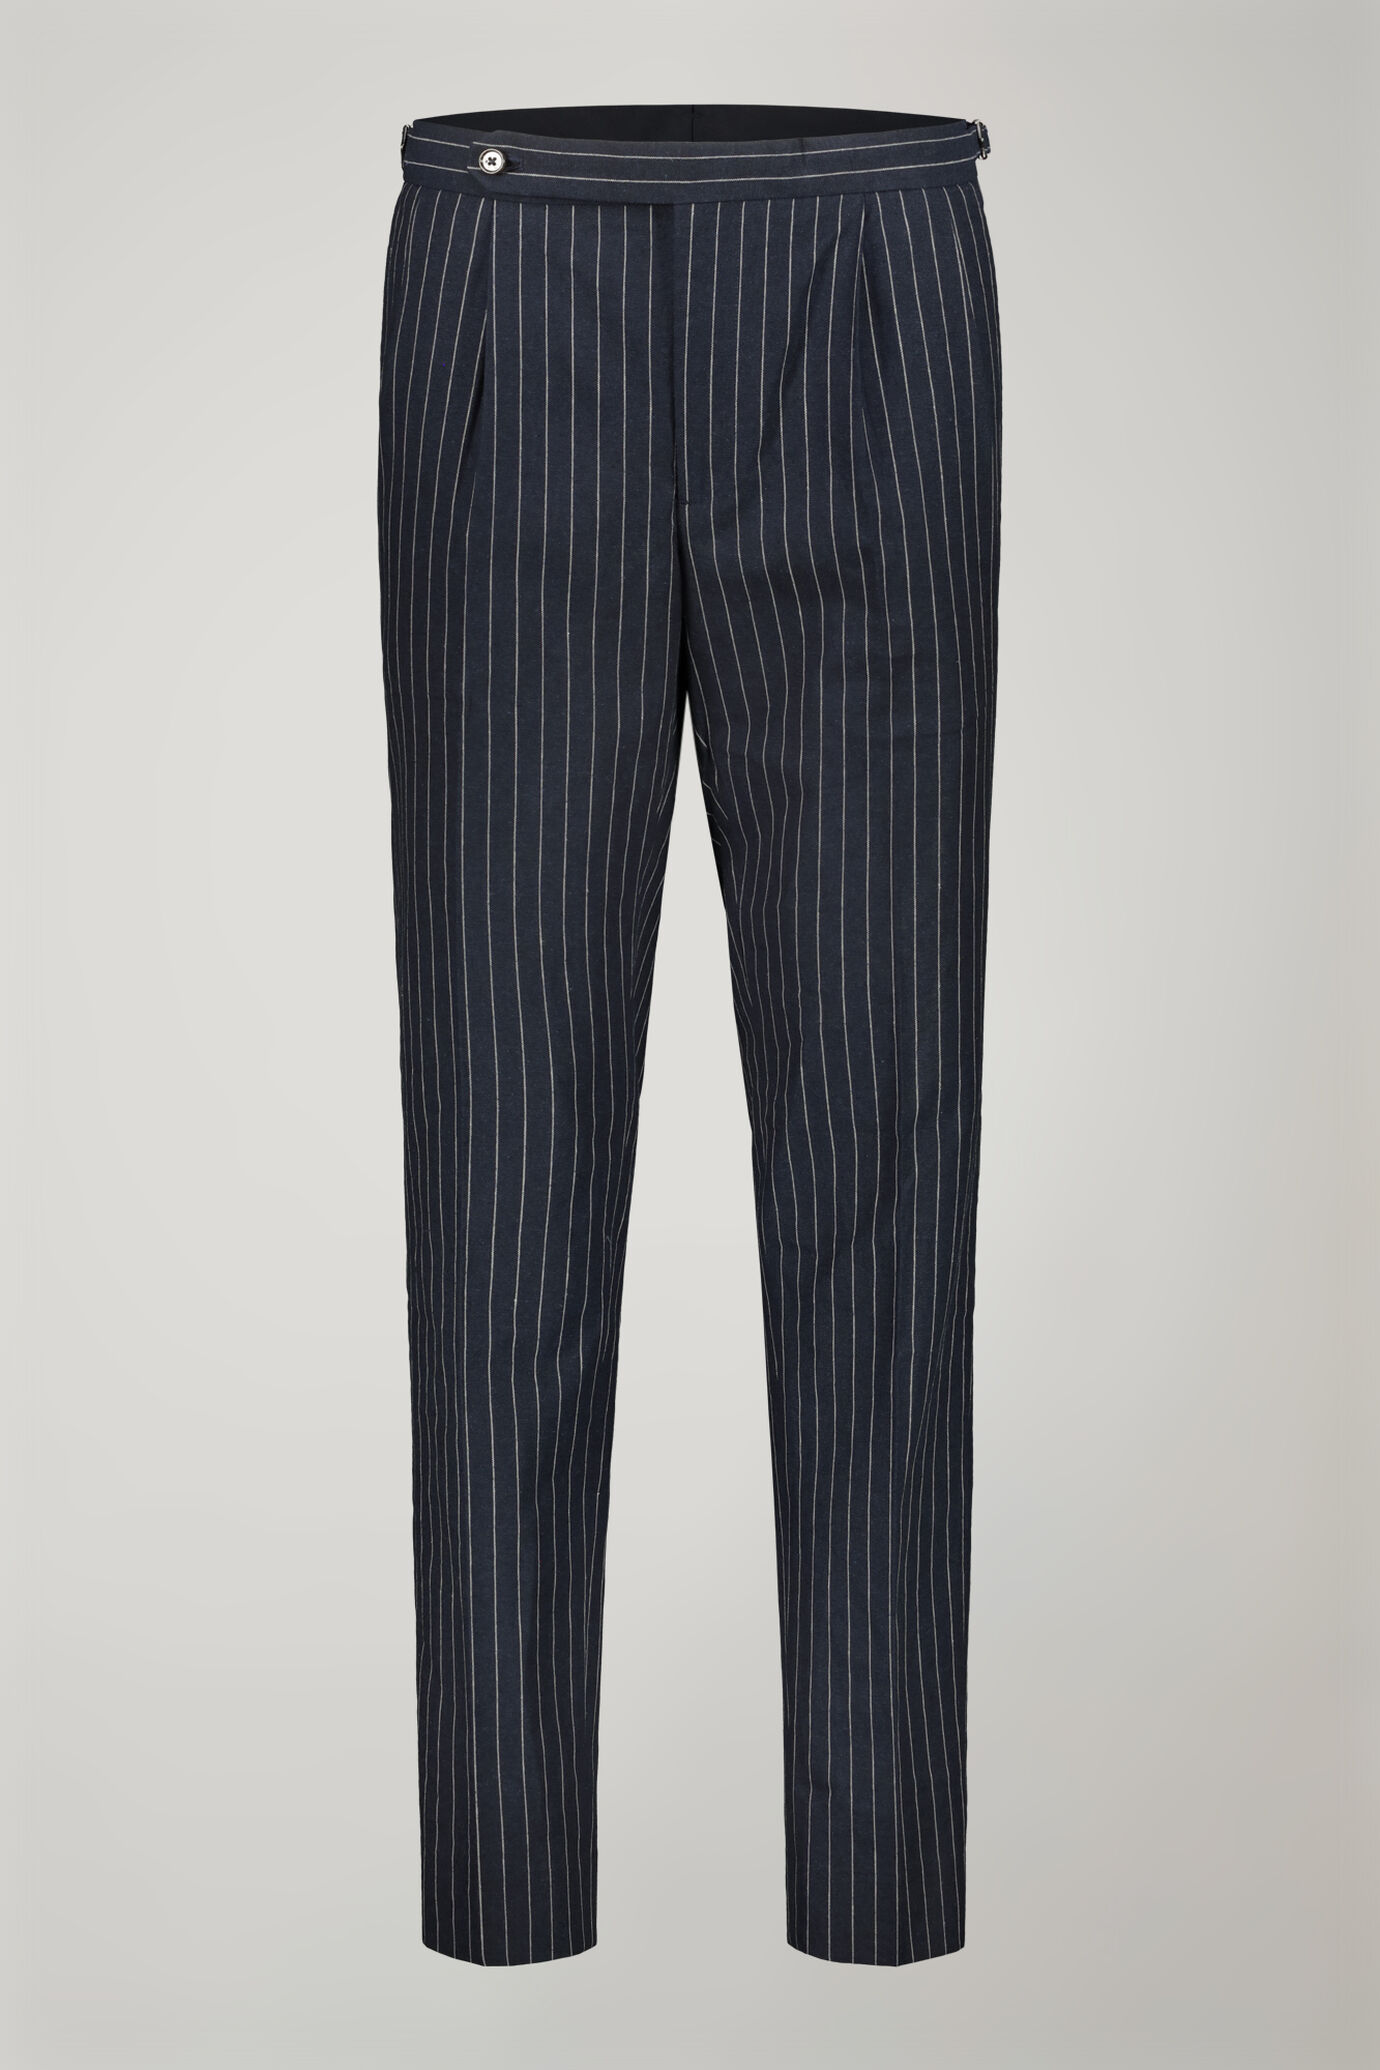 Men's classic double pinces trousers linen and cotton fabric with regular fit pinstripe design image number 5